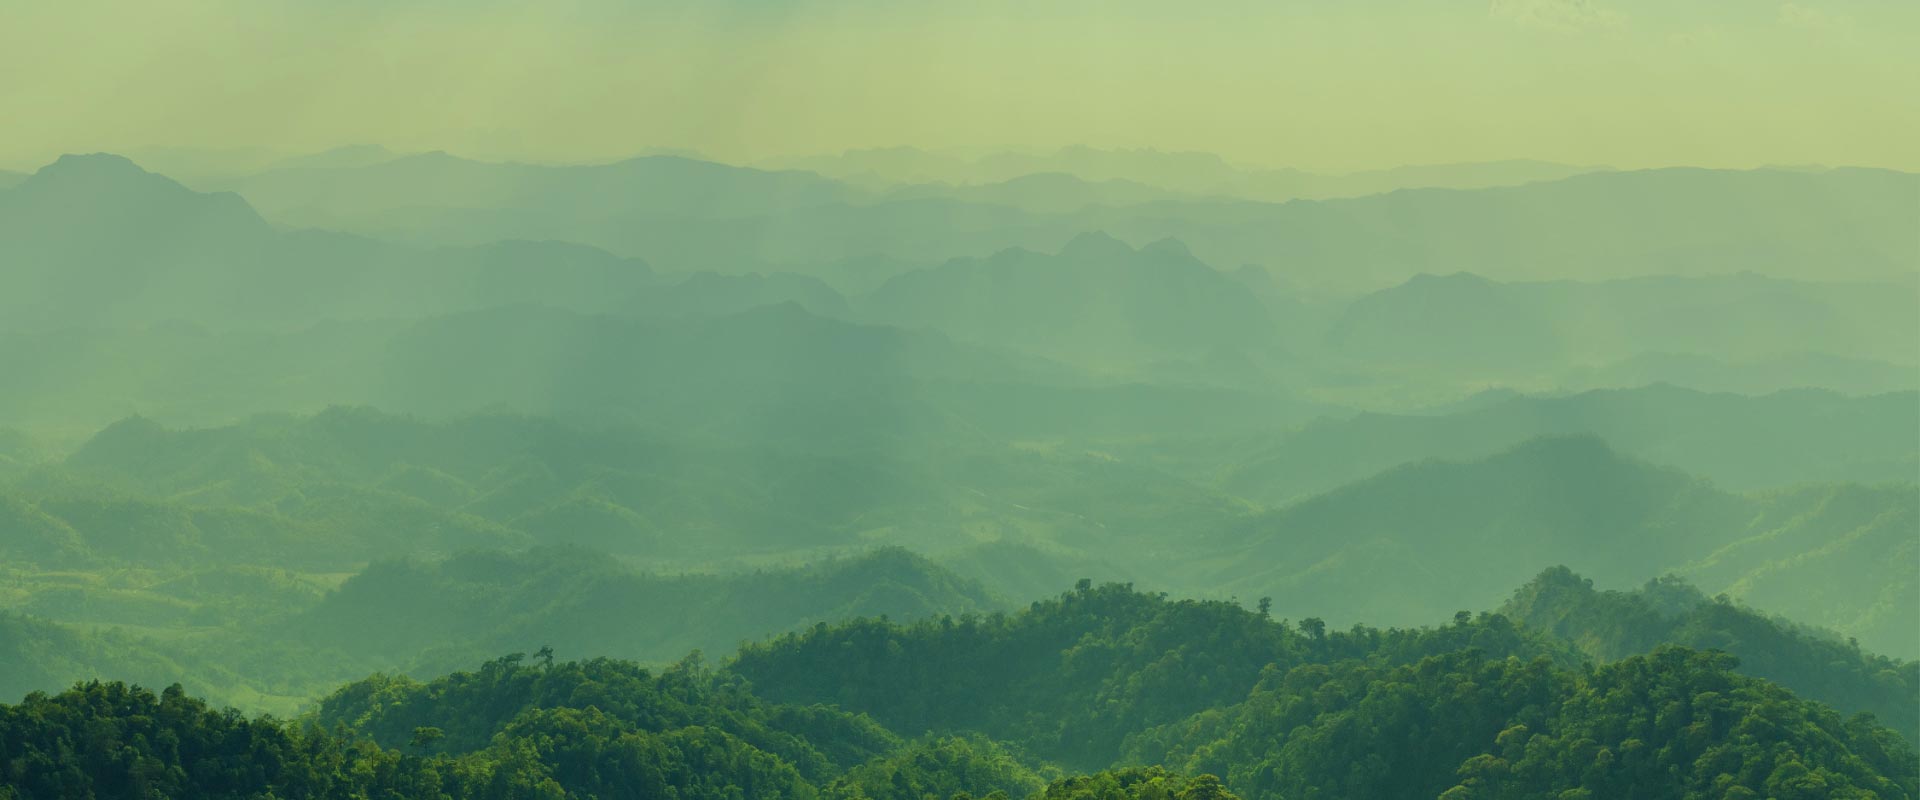 Wide image of rolling hills and mountains covered in lush green trees with the horizon in the distance.